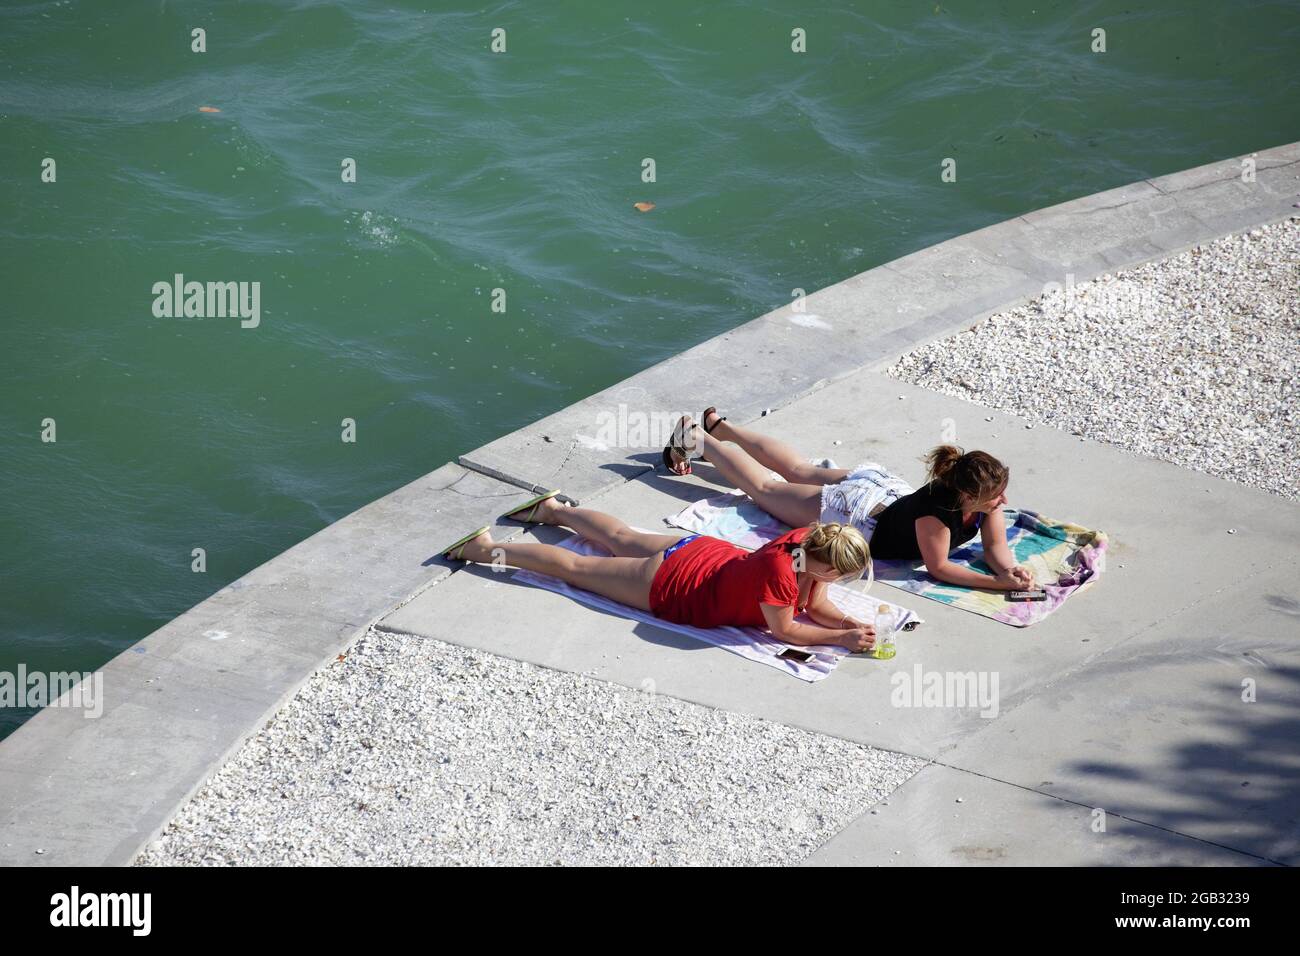 Two young women sunbathing while lying on beach towels near water Stock Photo